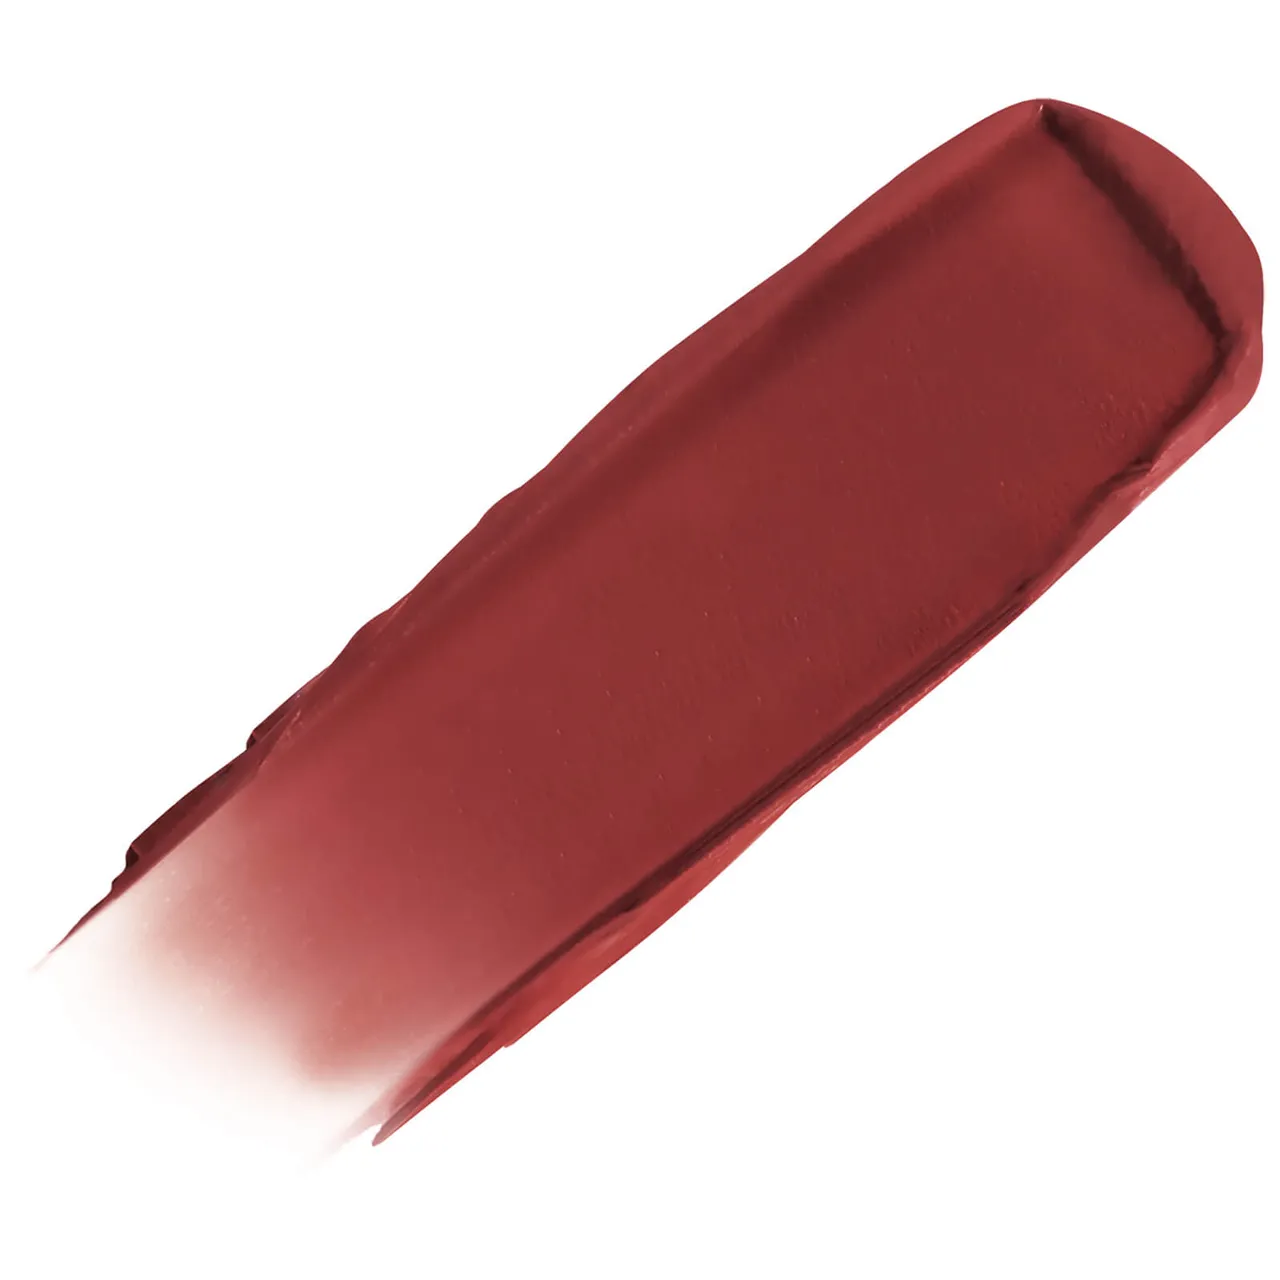 Lancôme L'Absolu Rouge Intimatte Lipstick 3.4ml (Various Shades) - 289 French Peluche